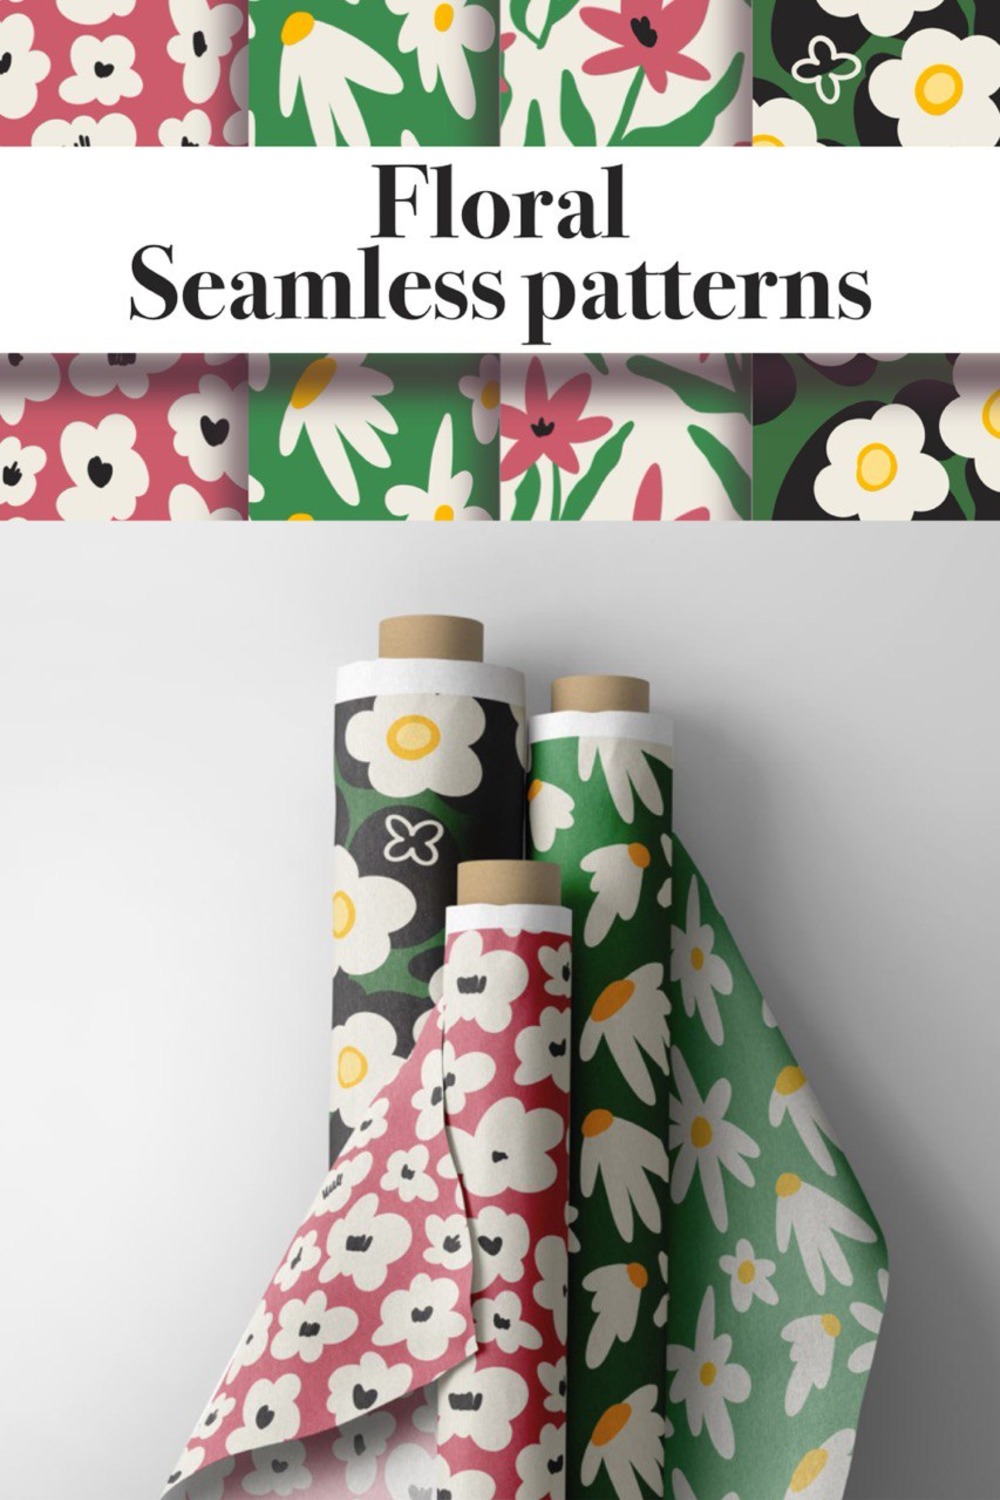 Floral Seamless patterns pinterest preview image.